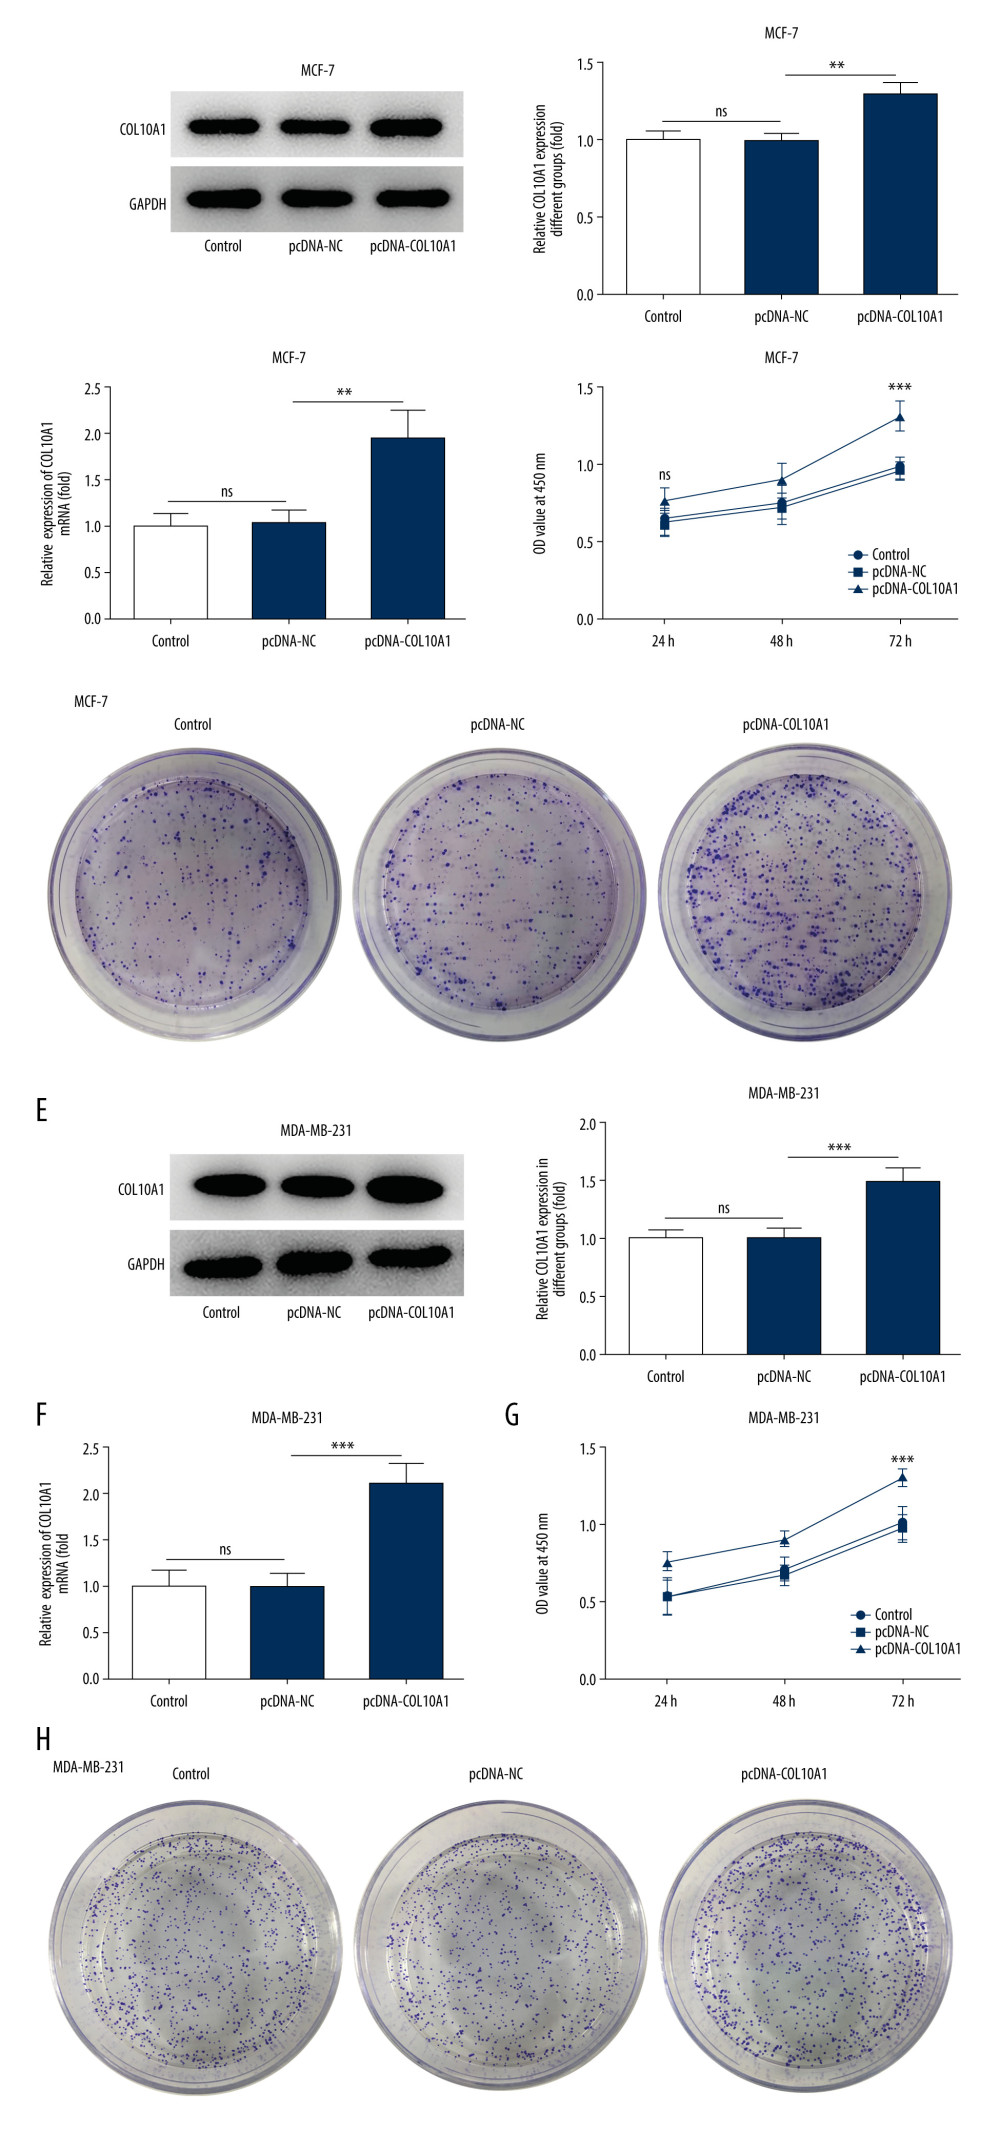 Upregulation of COL10A1 enhanced cell proliferation and clone-forming abilities of breast cancer cells. (A) Western blot analysis was performed to detect the transfection efficiency in MCF-7 cells which were transfected with pcDNA-COL10A1. (B) RT-qPCR analysis was performed to detect the transfection efficiency in MCF-7 cells which were transfected with pcDNA-COL10A1. (C) CCK-8 assay was applied to explore the effect of COL10A1 overexpression on cell viability of MCF-7. (D) Colony formation assay was applied to explore the effect of COL10A1 overexpression on clone-forming ability of MCF-7. (E) Western blot analysis was performed to detect the transfection efficiency in MDA-MB-231 cells which were transfected with pcDNA-COL10A1. (F) RT-qPCR analysis was performed to detect the transfection efficiency in MDA-MB-231 cells which were transfected with pcDNA-COL10A1. (G) CCK-8 assay was applied to explore the effect of COL10A1 overexpression on cell viability of MDA-MB-231. (H) Colony formation assay was applied to explore the effect of COL10A1 overexpression on clone-forming ability of MDA-MB-231. * P<0.05, ** P<0.01, *** P<0.001.